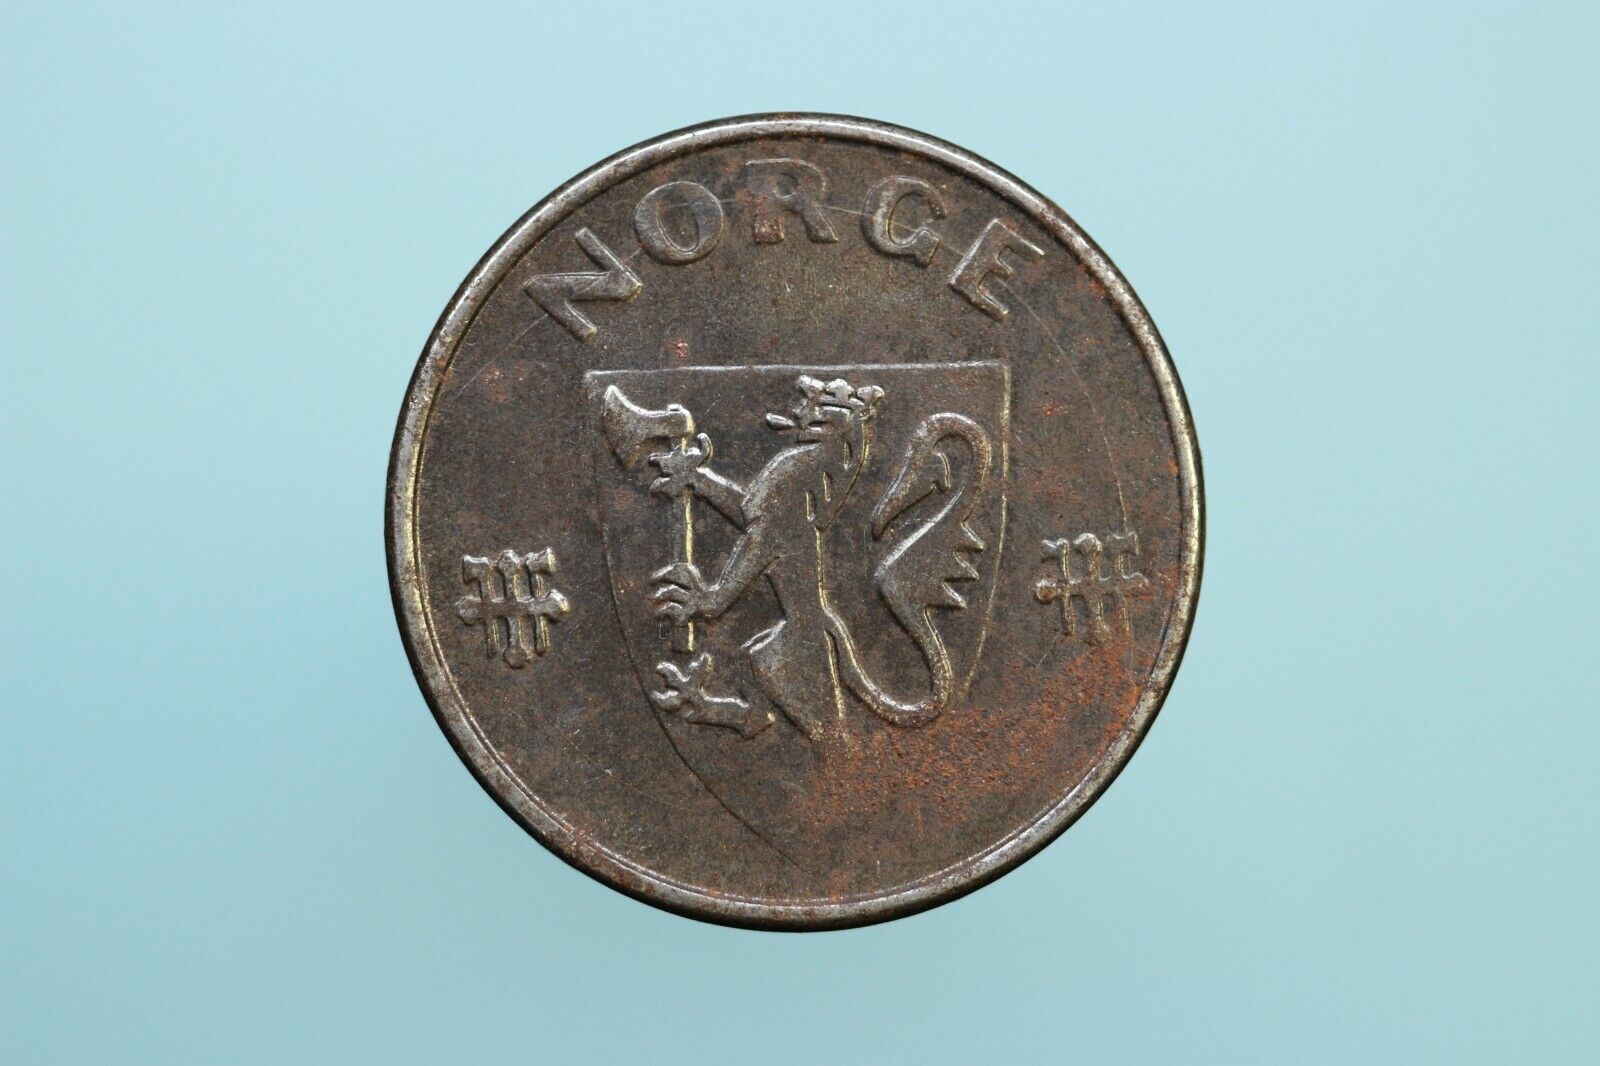 Norway bronze 5 Ore 1914 and 1942 lot of 2 coins Без бренда - фотография #2